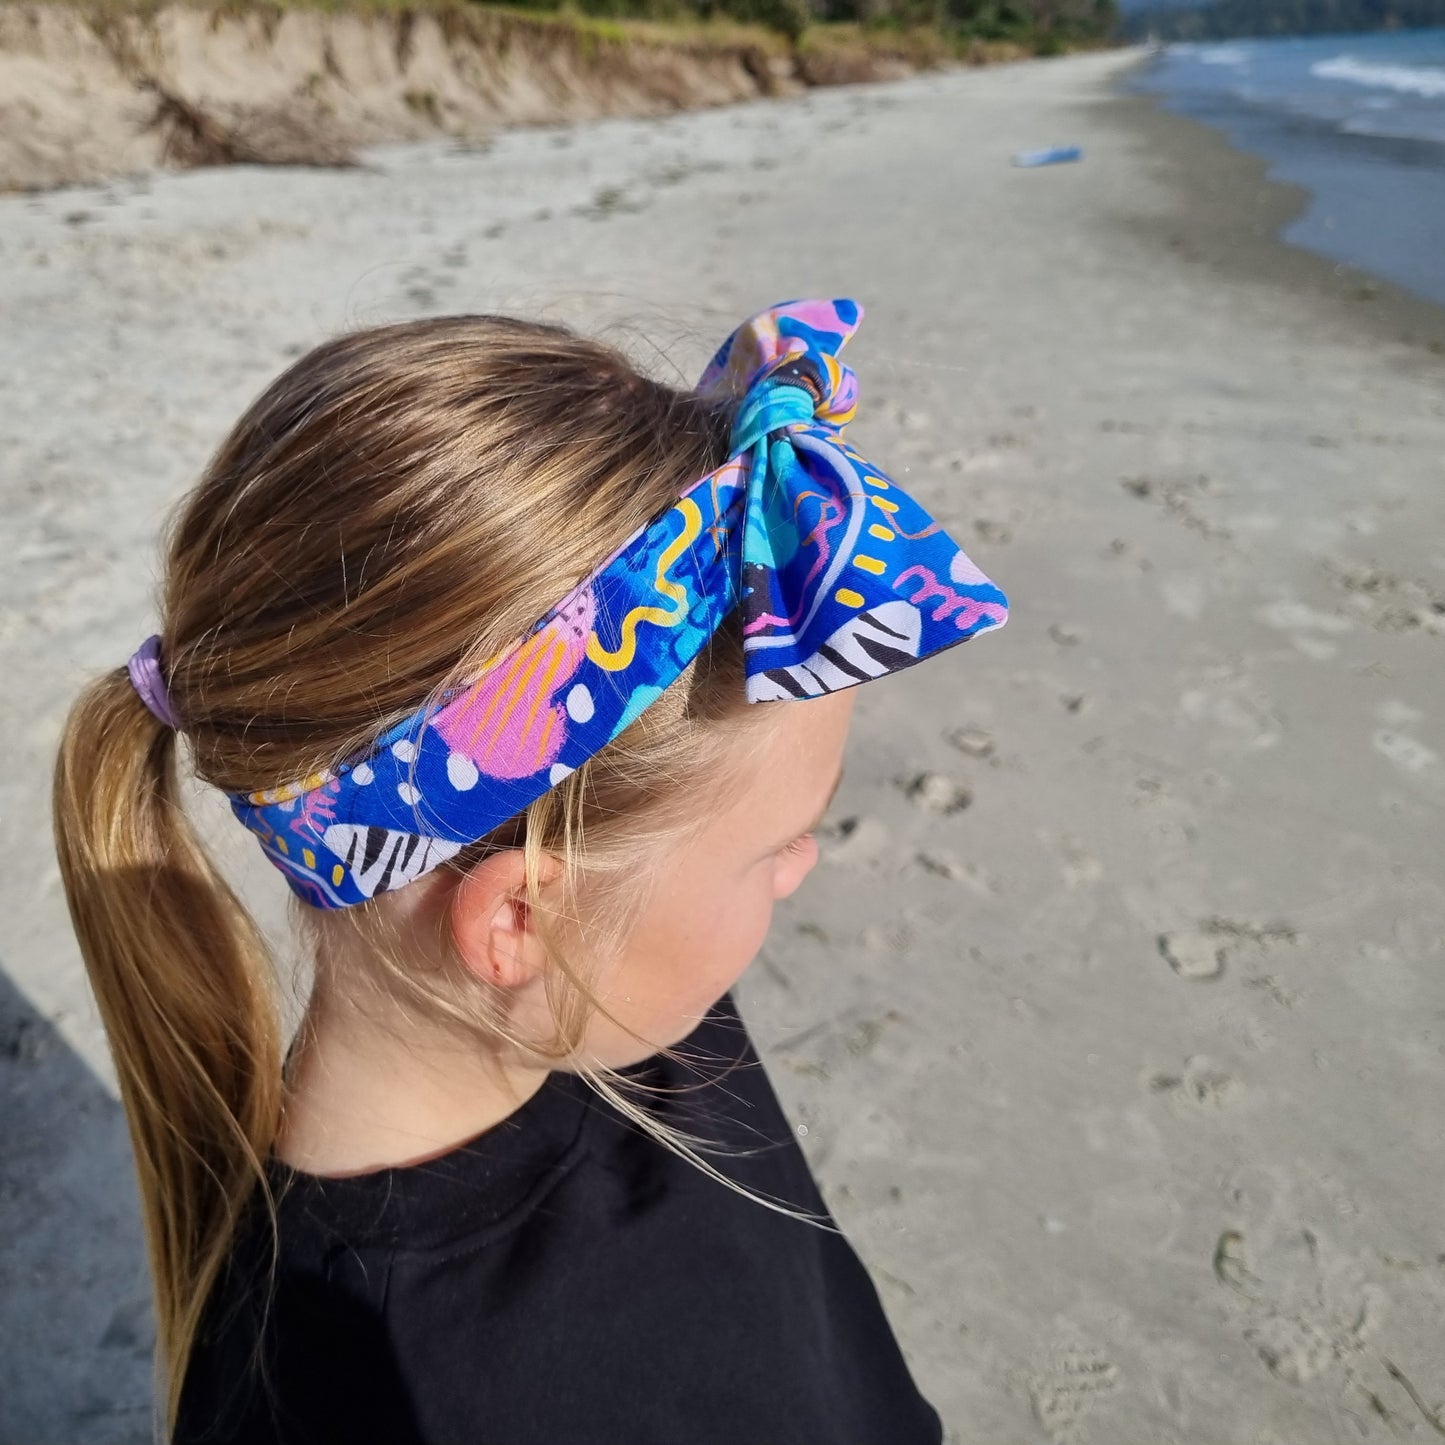 Top Knot Headband - Swirls worn by a girl at the beach. Blue, orange and purple abstract pattern on pink background.